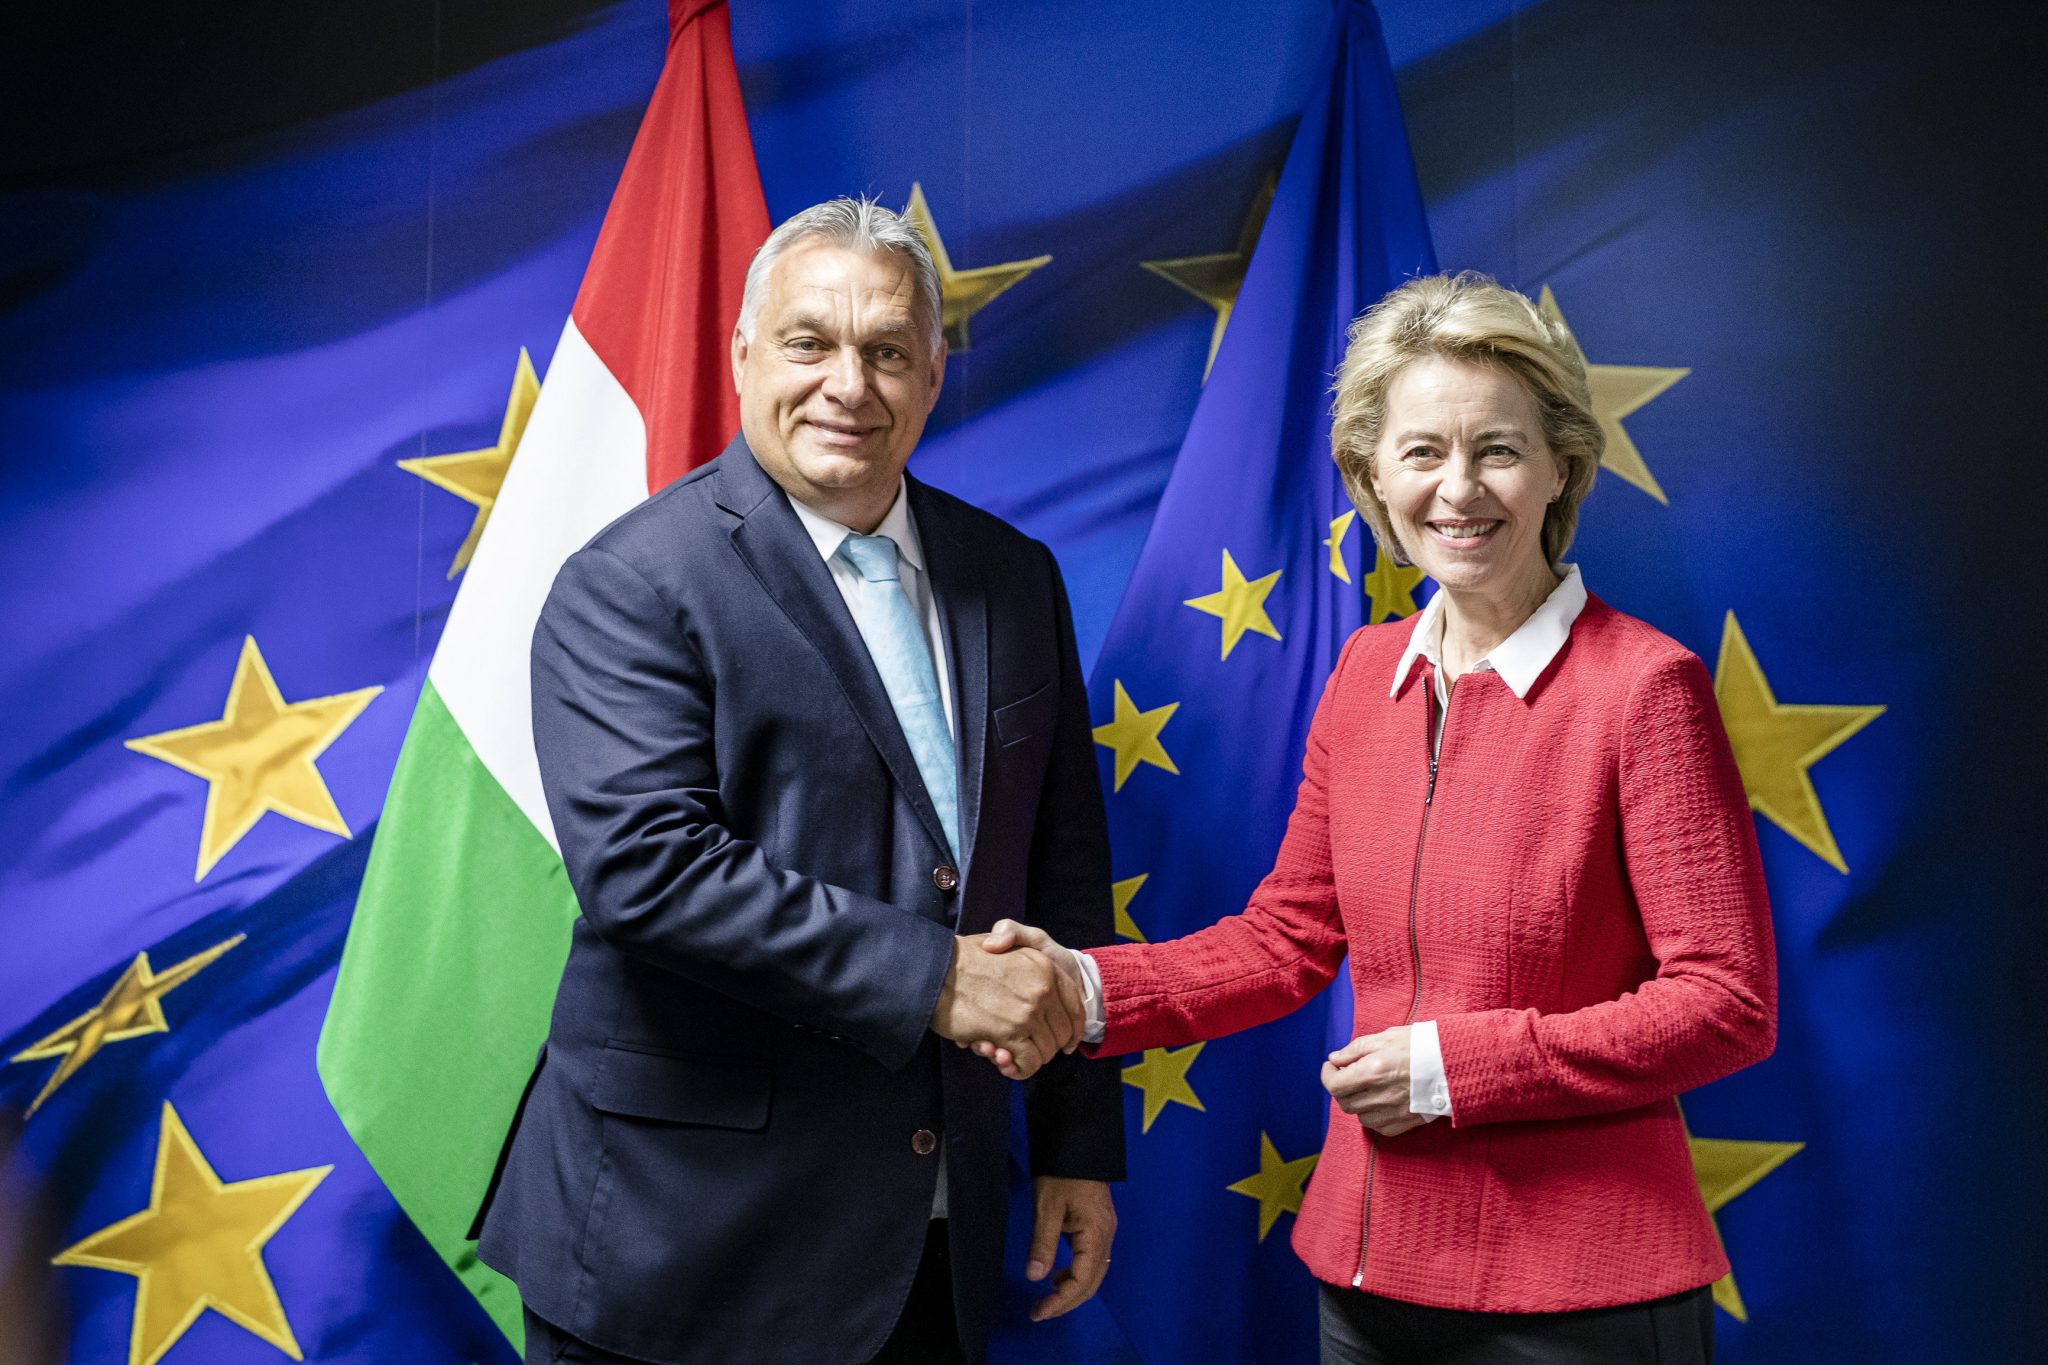 Watch: EC to Activate Rule-Of-Law Conditionality Mechanism Against Hungary